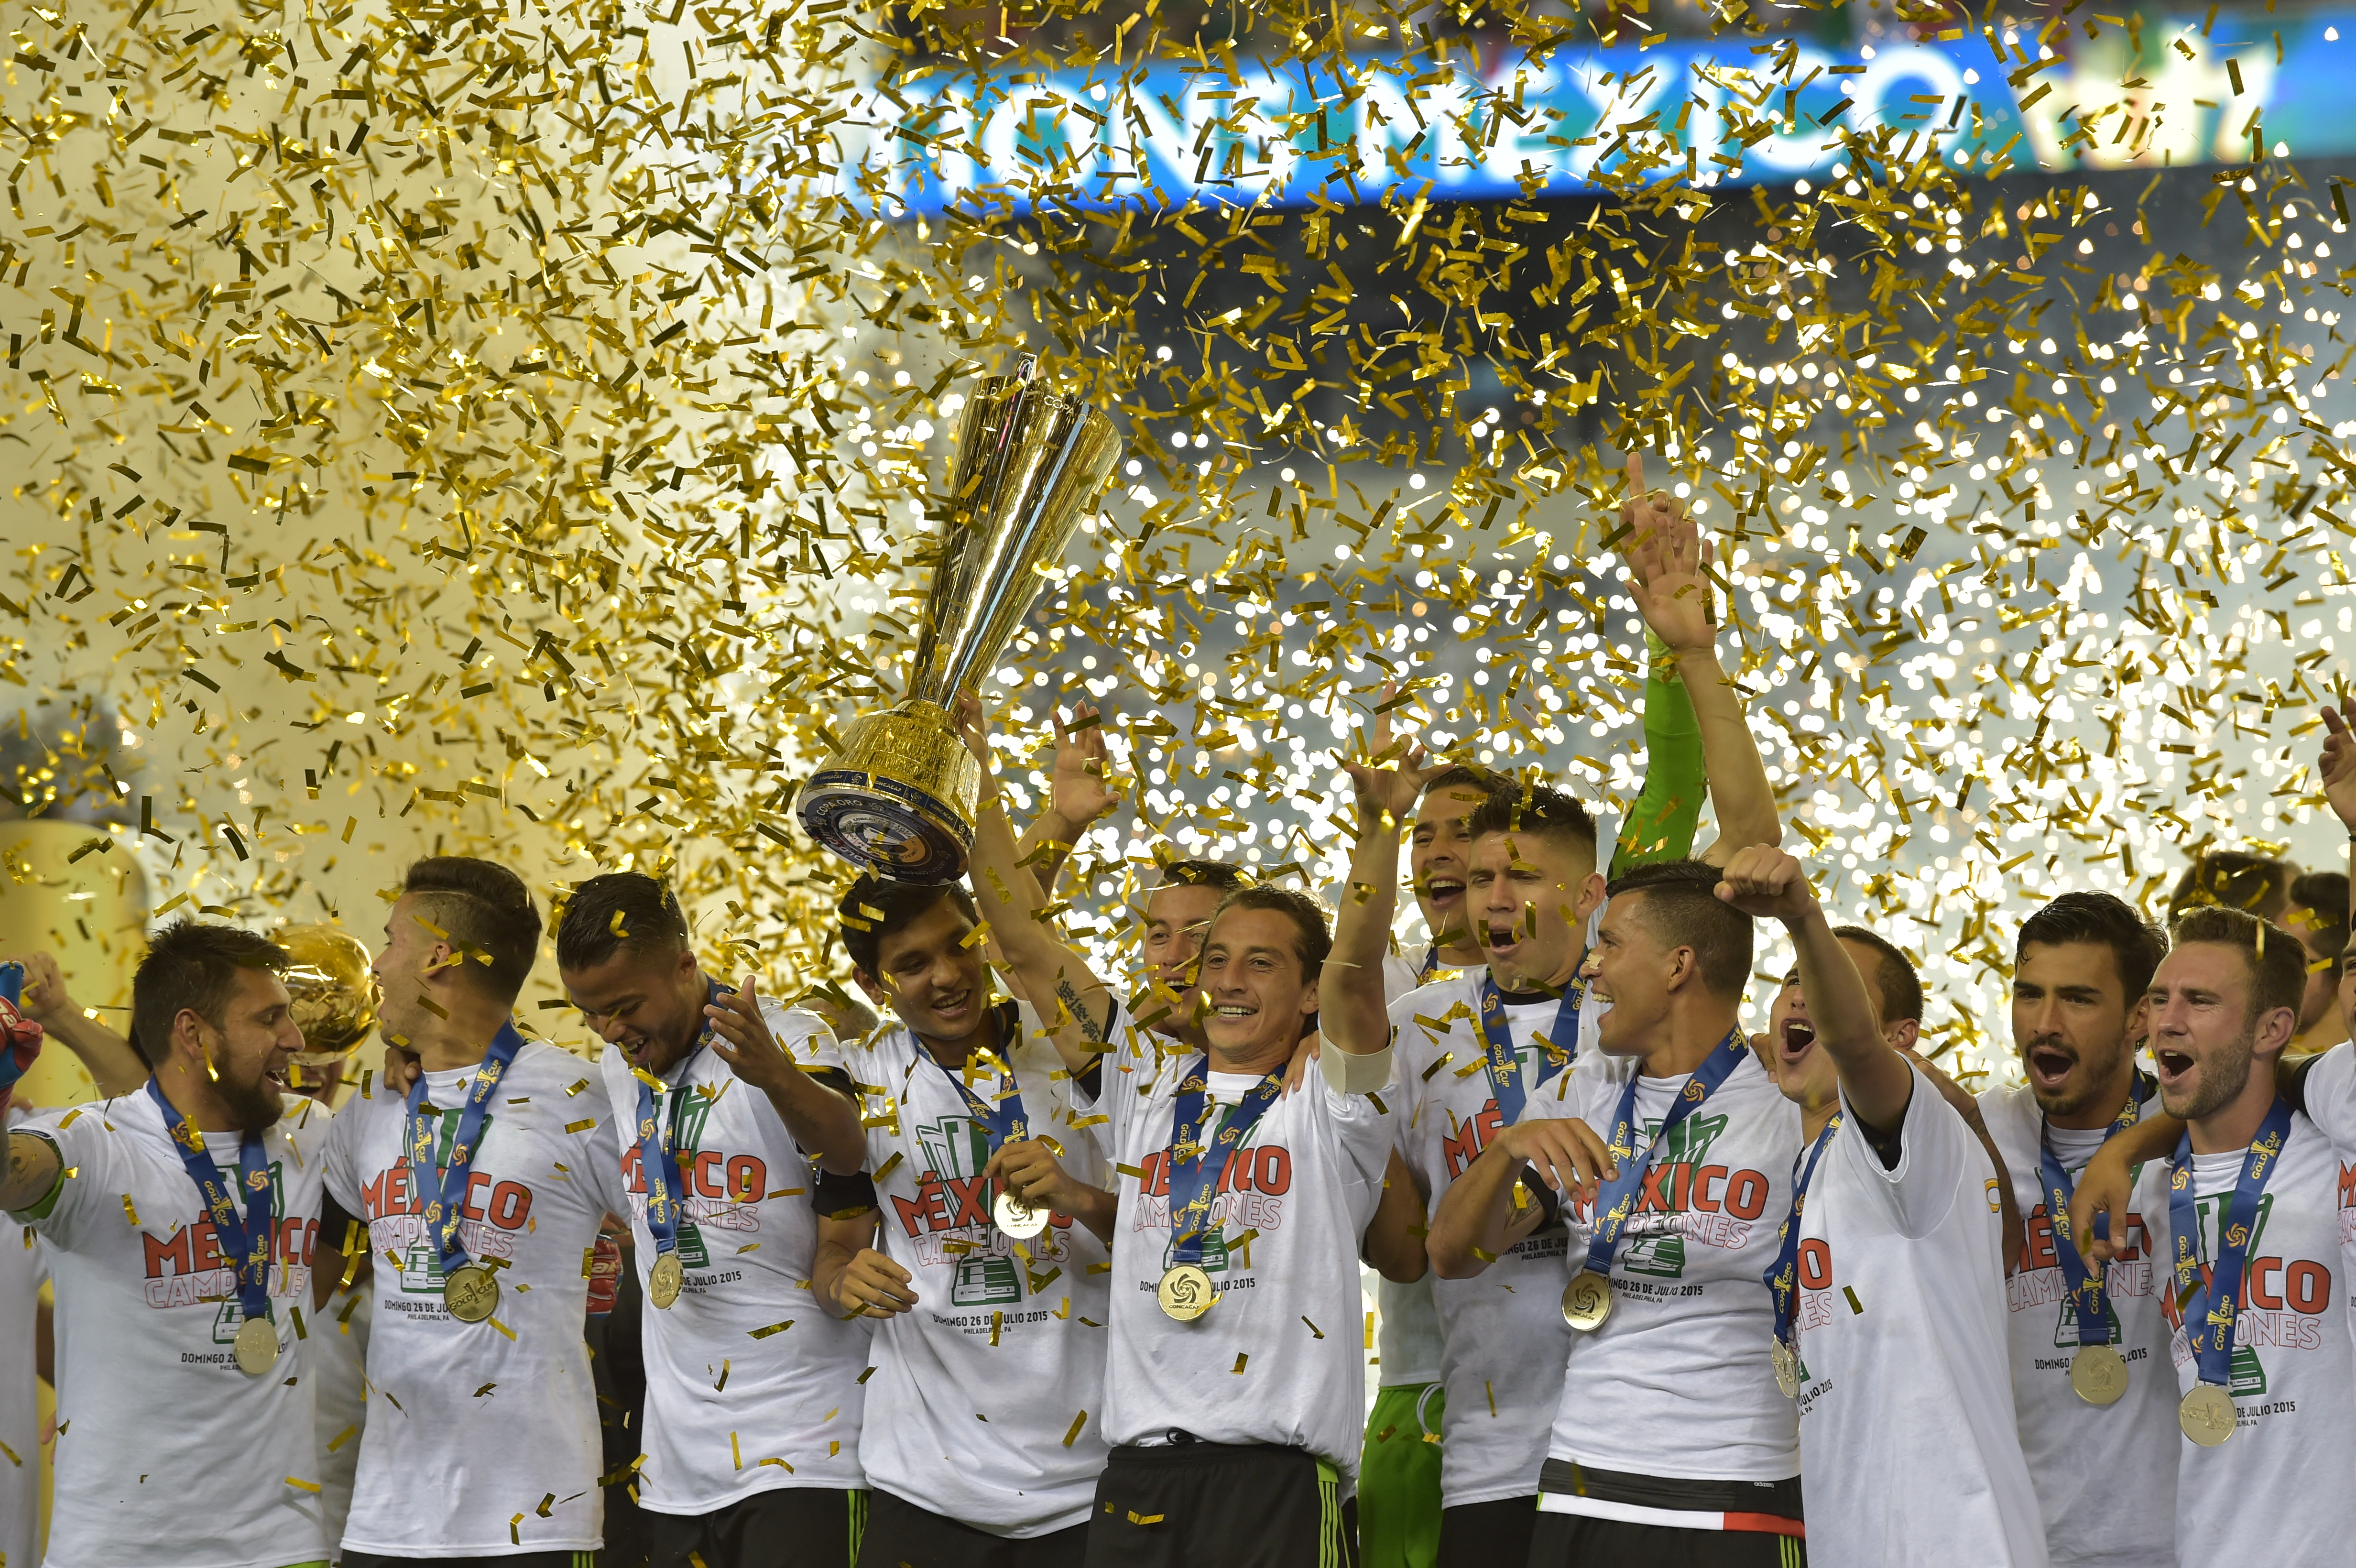 Concacaf Gold Cup Champions Mexico Men's National Team Shirt in 2023